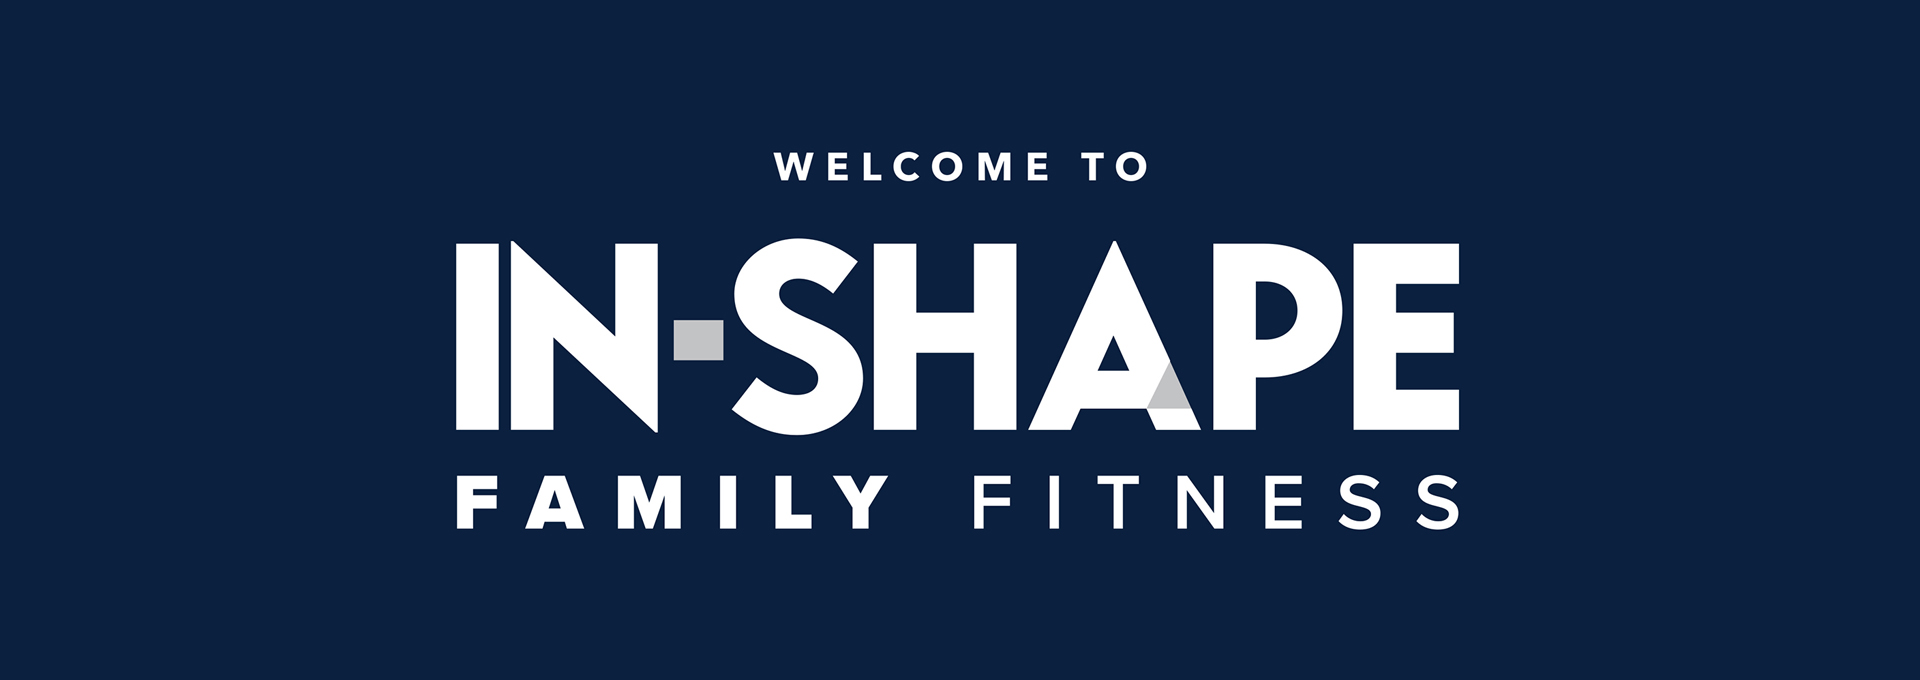 California Family Fitness and In-Shape Health Clubs Rebrand to In-Shape  Family Fitness